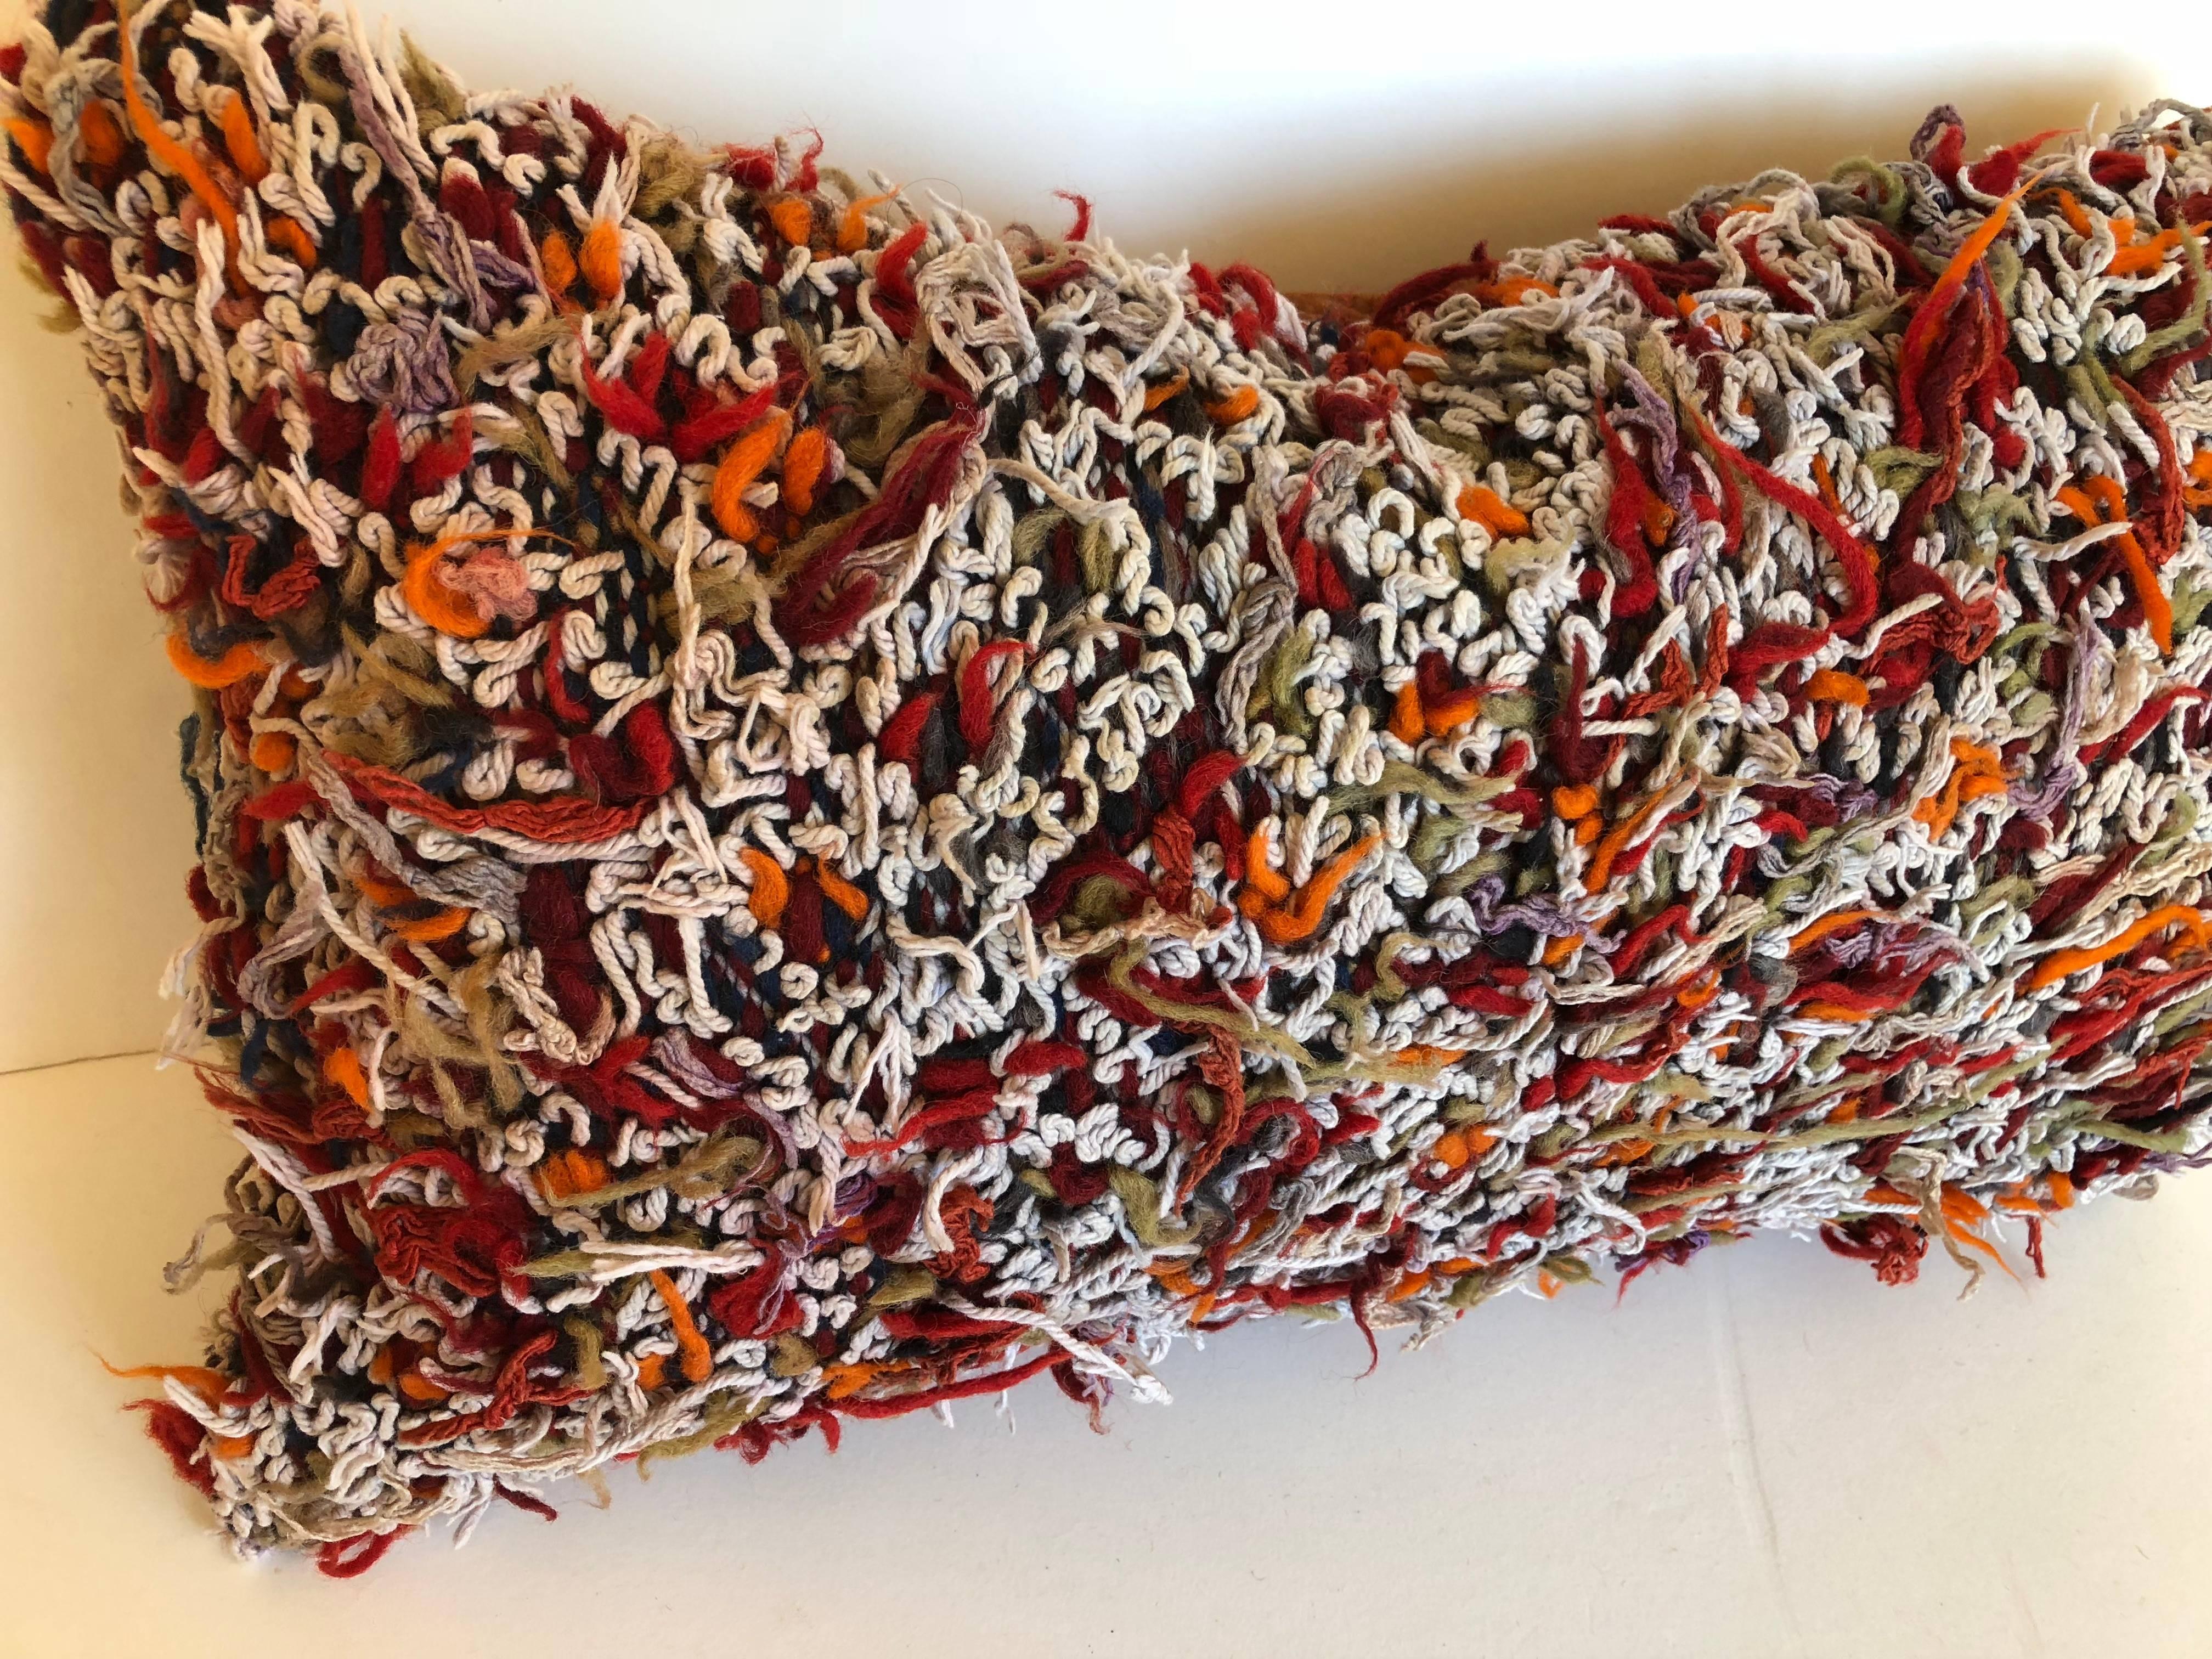 Custom pillow cut from a hand-loomed wool vintage Moroccan Berber rug from the Atlas mountains. This pillow is made from the reverse side of the rug where all the wool as left uncut after the weaving process. The pillow is backed in a deep paprika